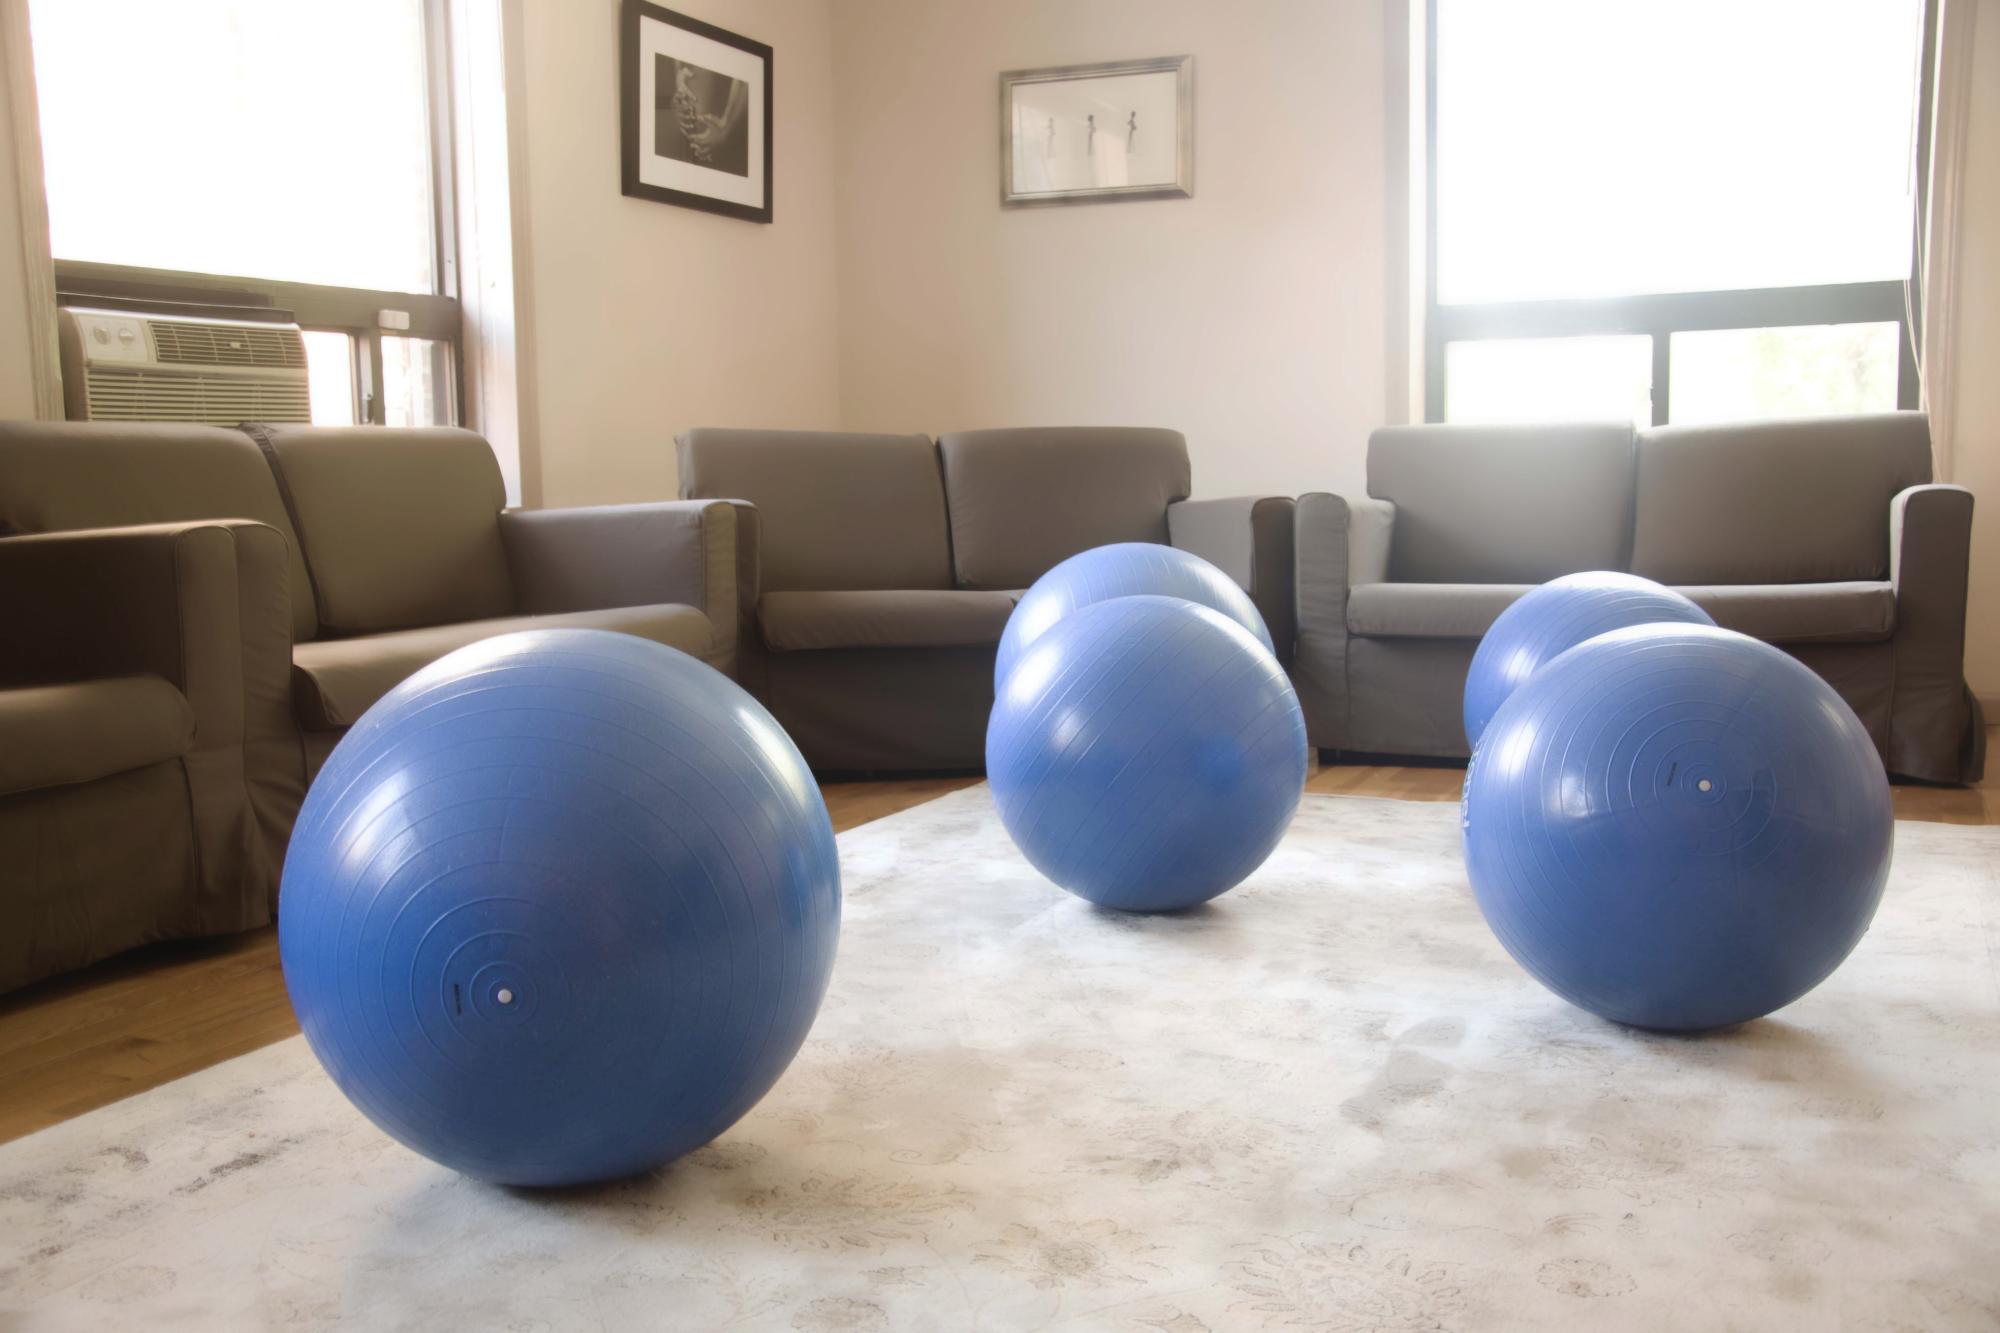 The Best Local Birthing Classes in NYC